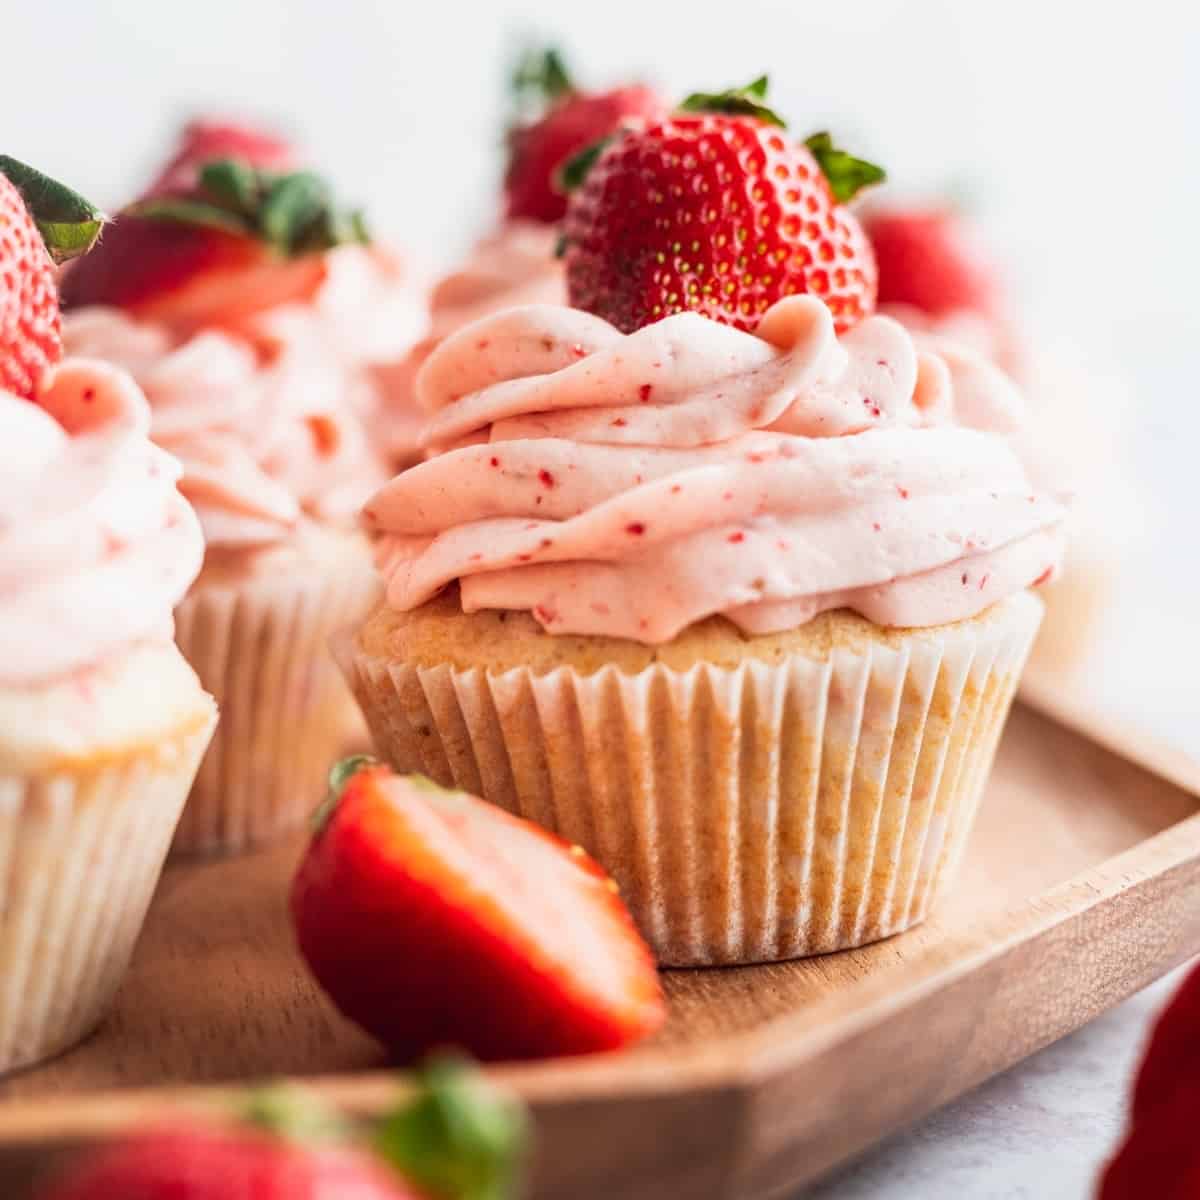 Strawberry Filled Cupcakes - Stephanie's Sweet Treats